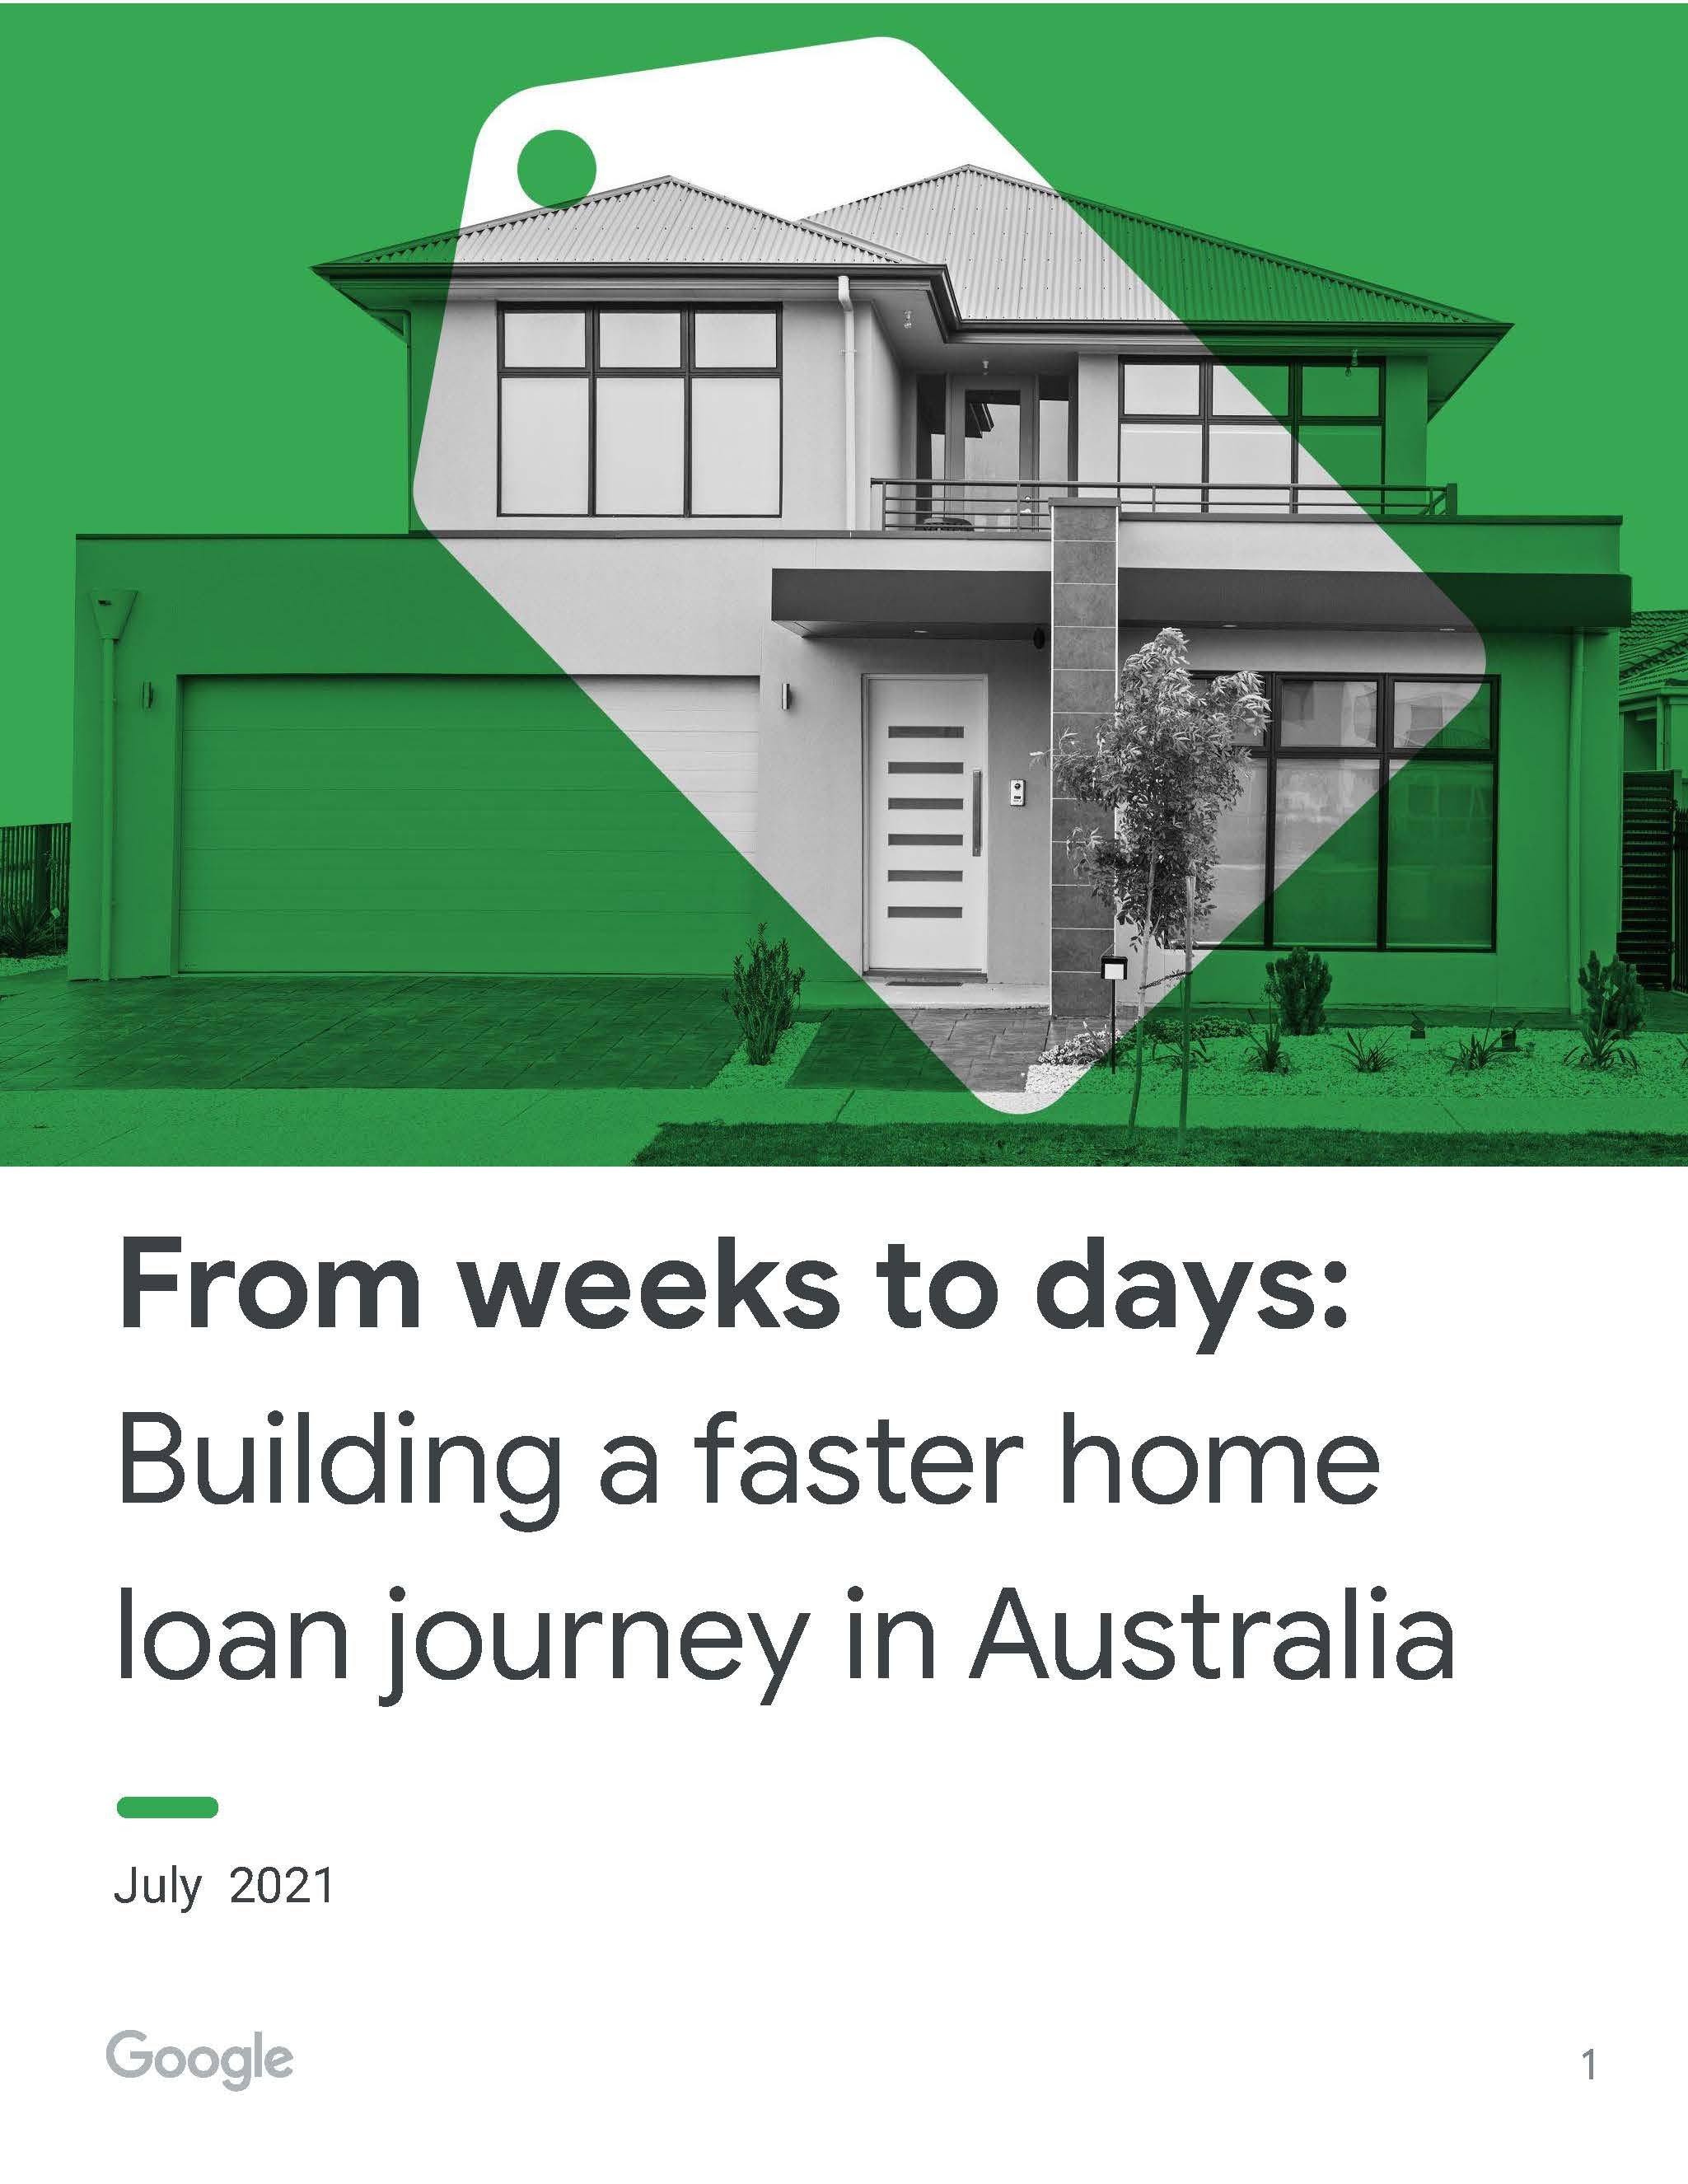 from_weeks_to_days_building_a_faster_home_loan_journey_for_aussies_en_Page_01.jpg